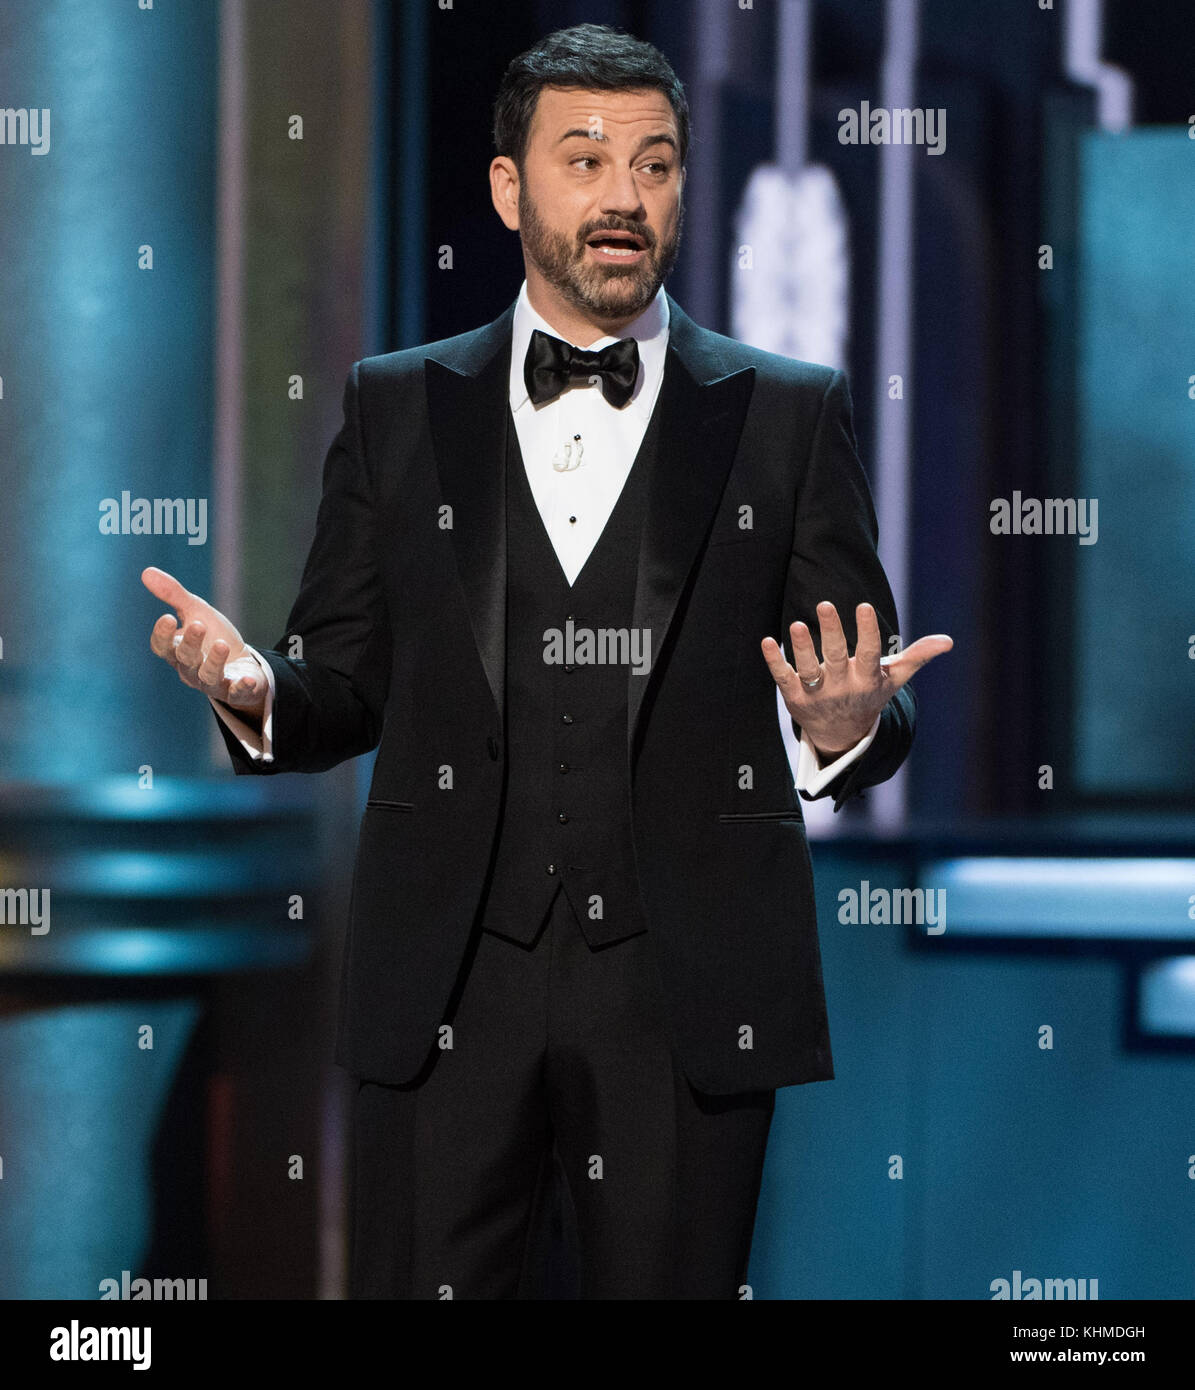 HOLLYWOOD, CA - FEBRUARY 26: Jimmy Kimmel performs onstage during the 89th Annual Academy Awards at Hollywood & Highland Center on February 26, 2017 in Hollywood, California  People:  Jimmy Kimmel  Transmission Ref:  MNC Stock Photo